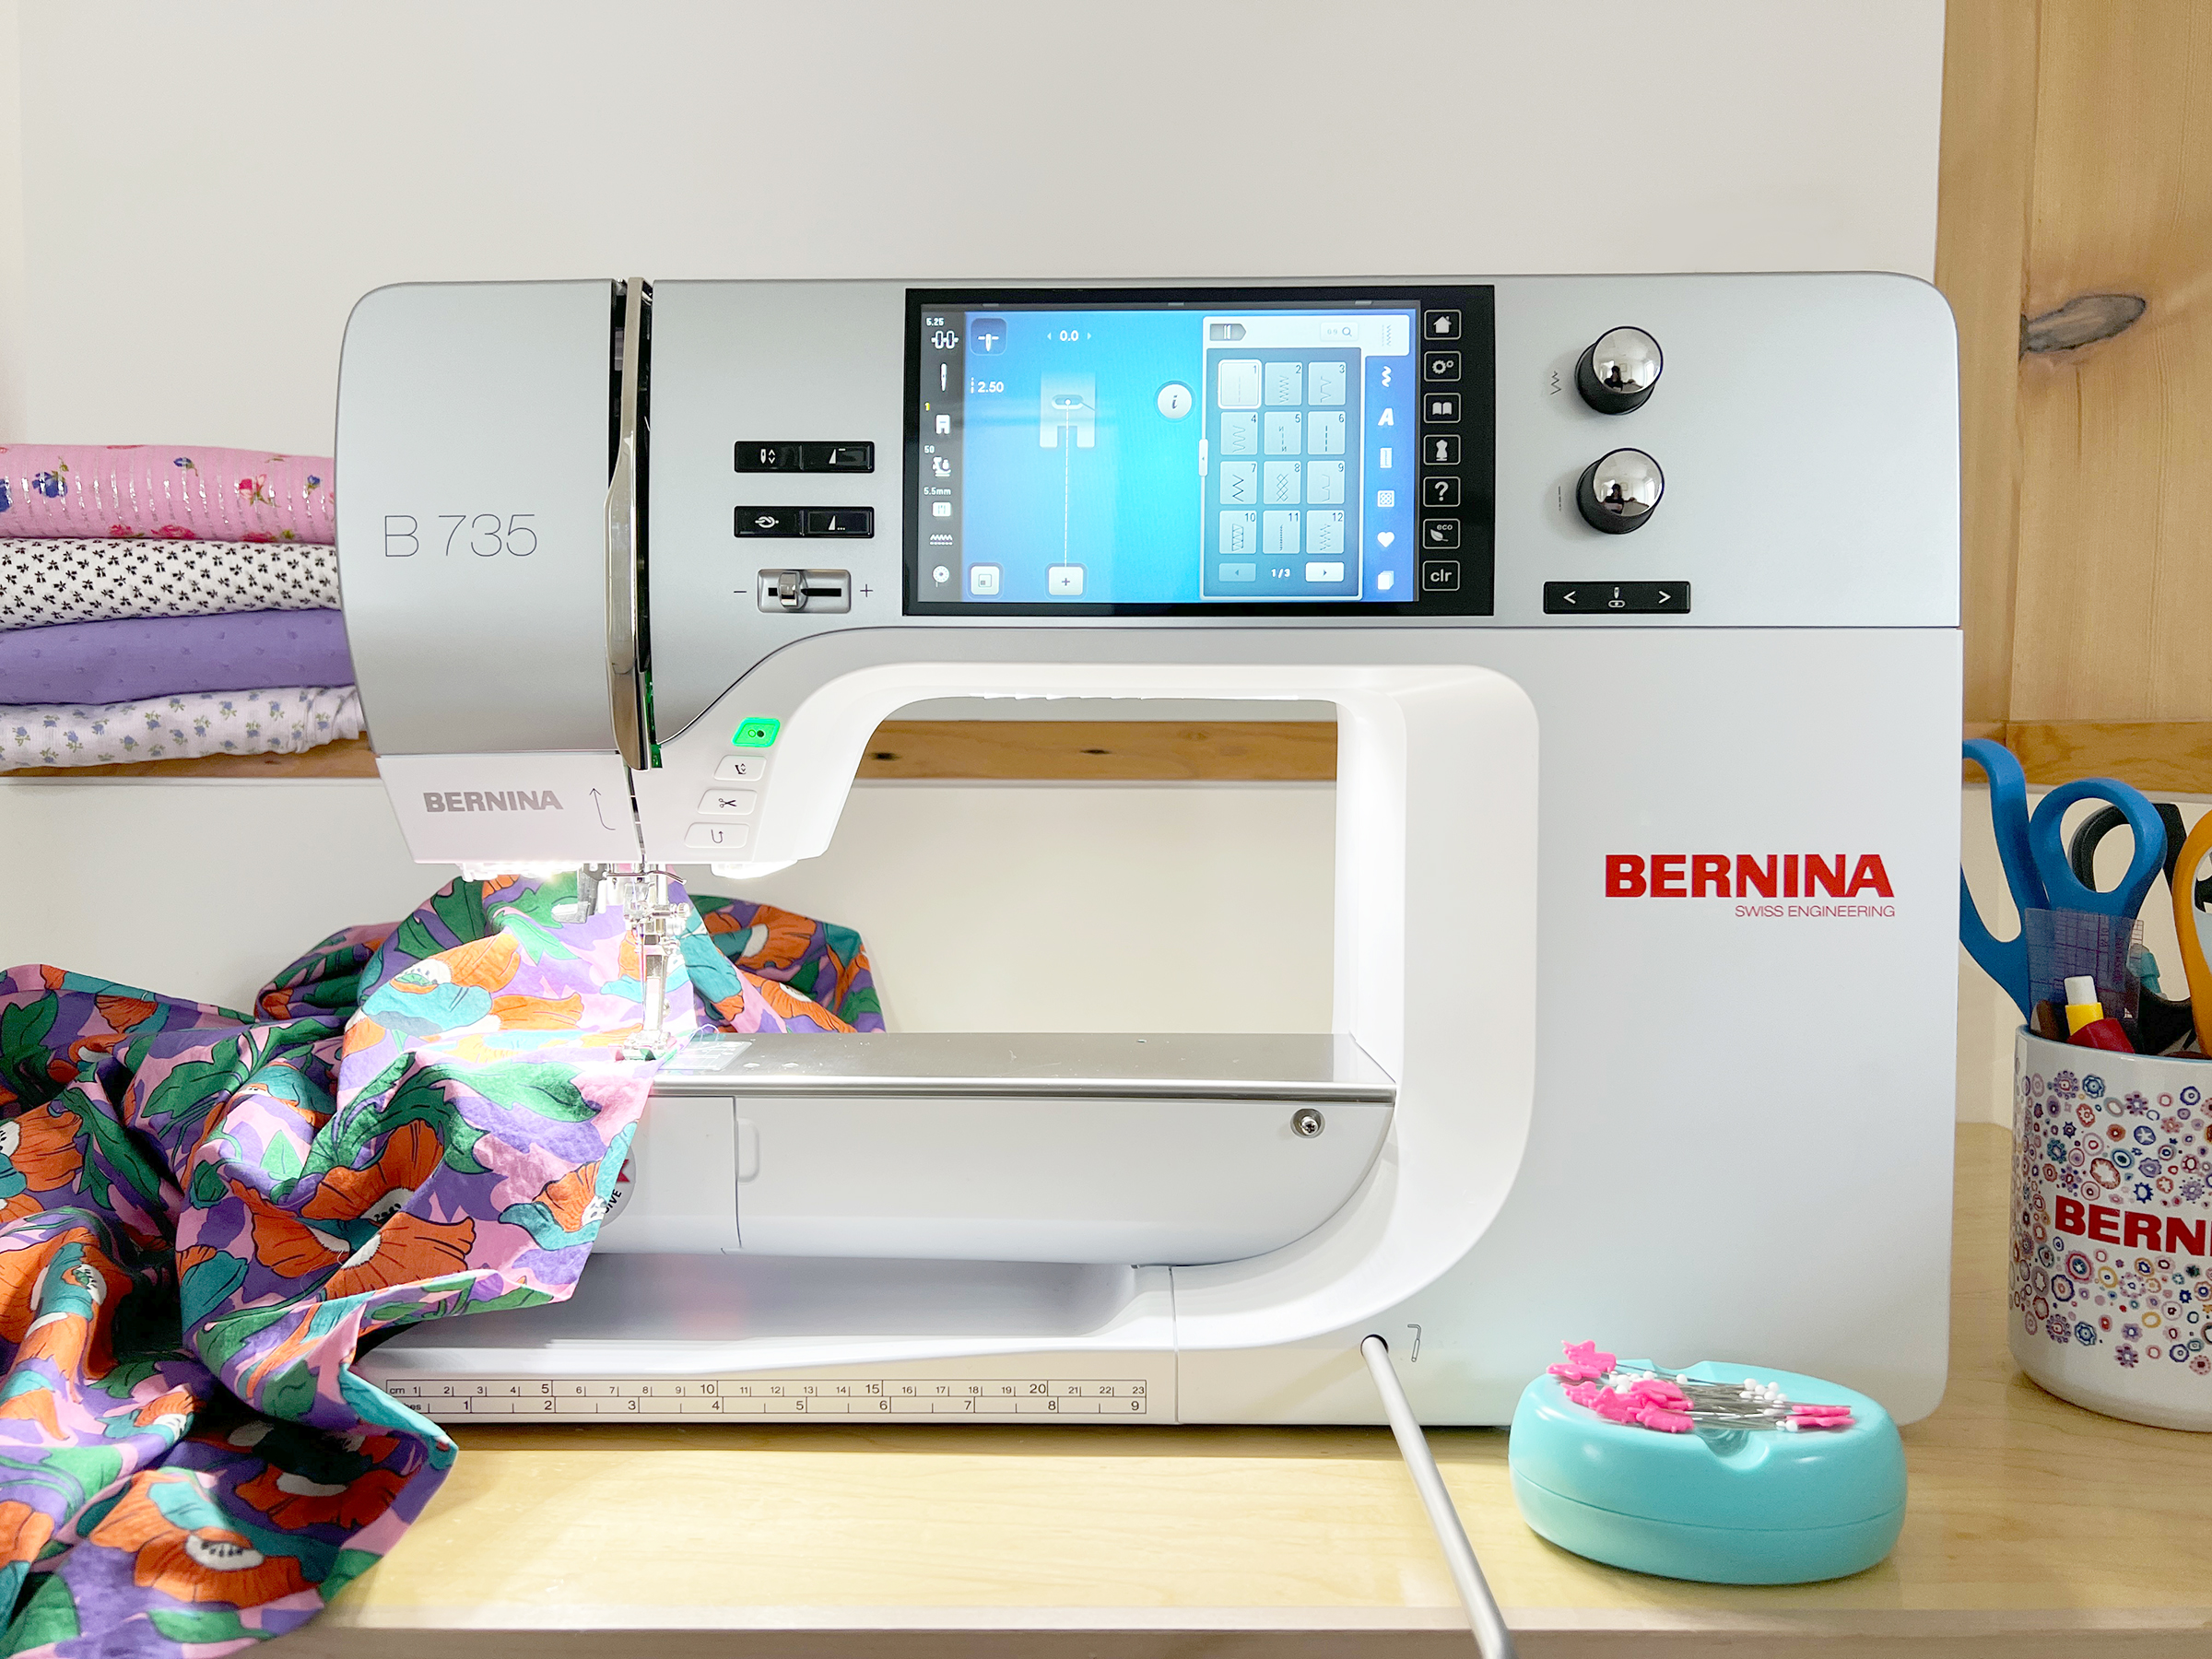 Close up shot of a BERNINA B735 sewing machine with colorful floral fabric under the needle.